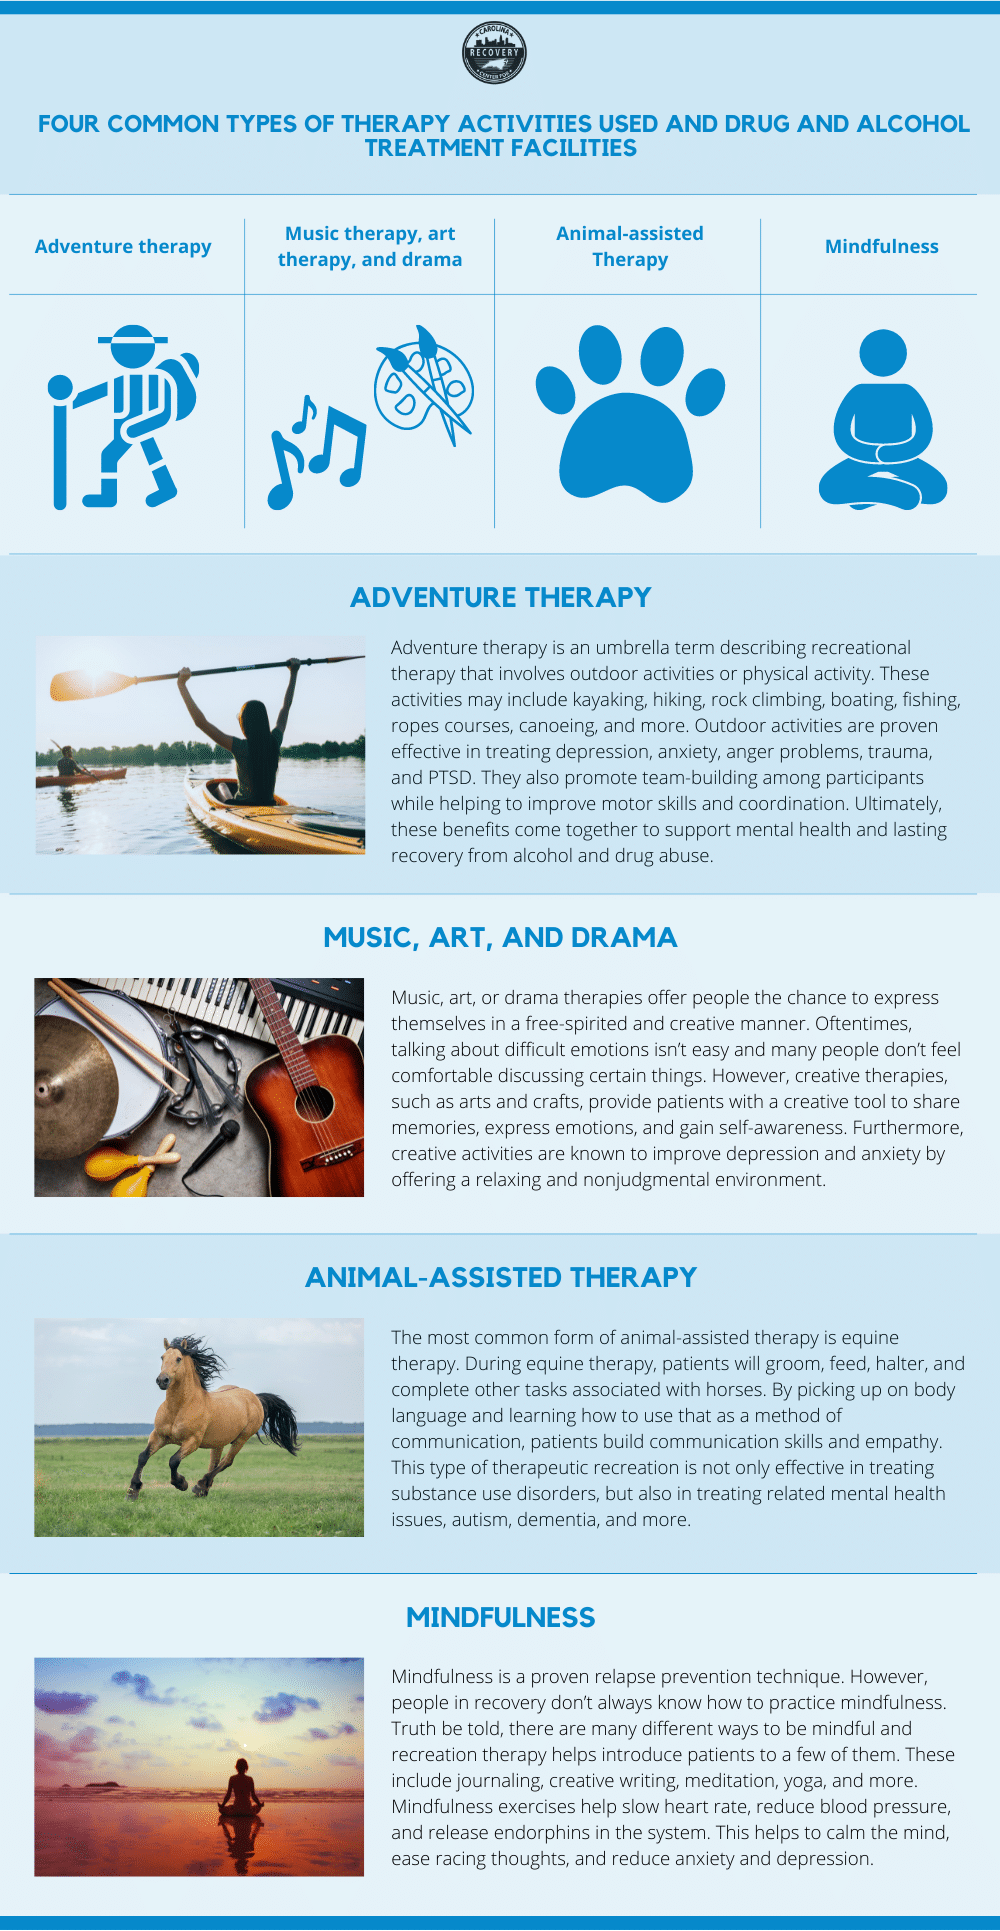 Four common types of therapy activities used and drug and alcohol treatment facilities